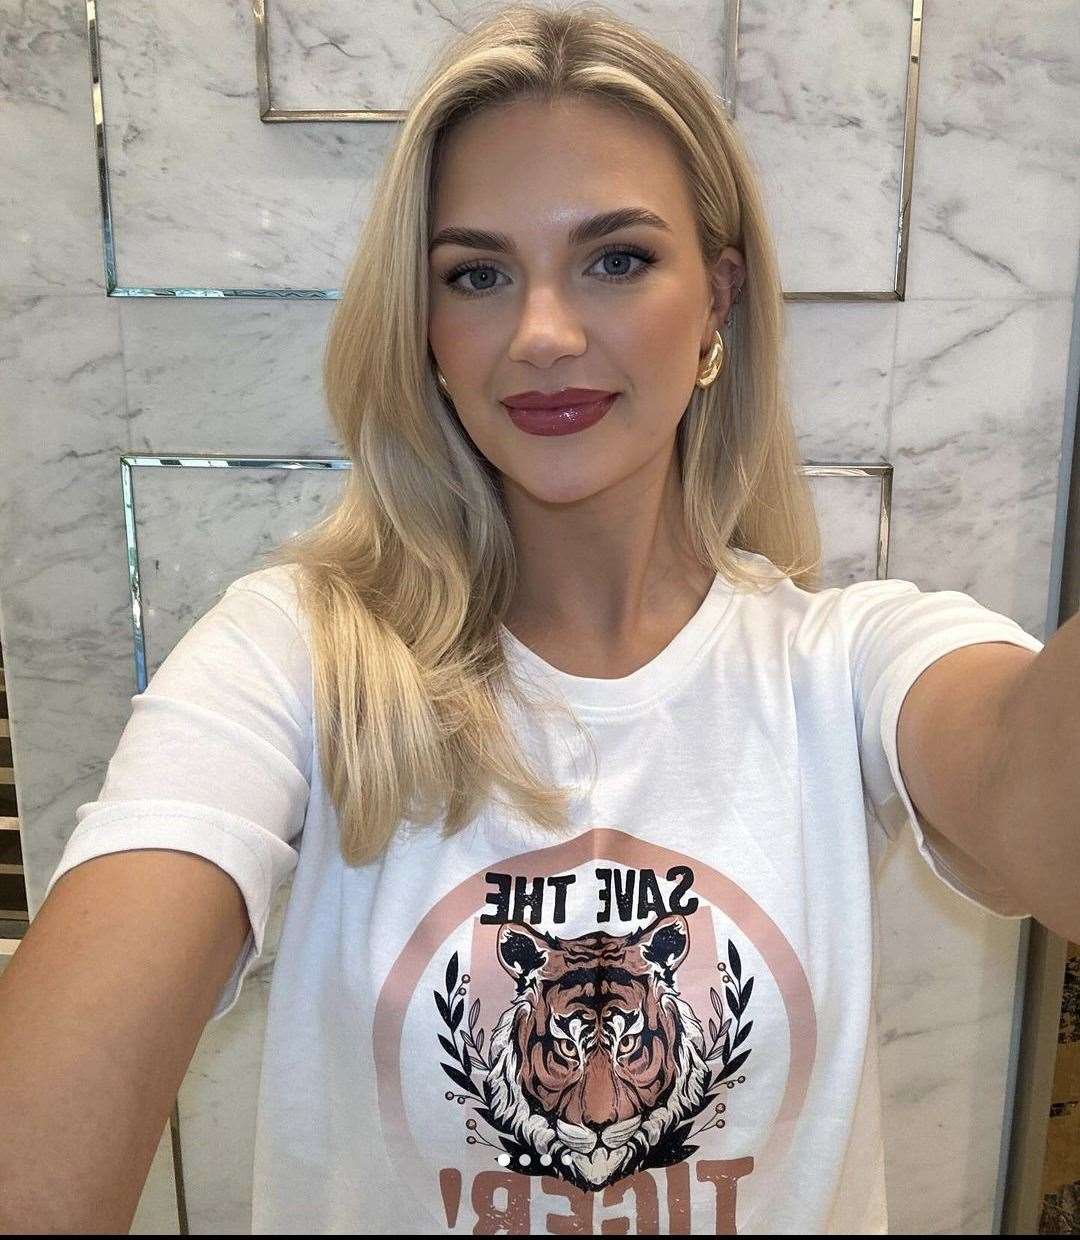 Miss Scotland participated in the save the tiger campaign.